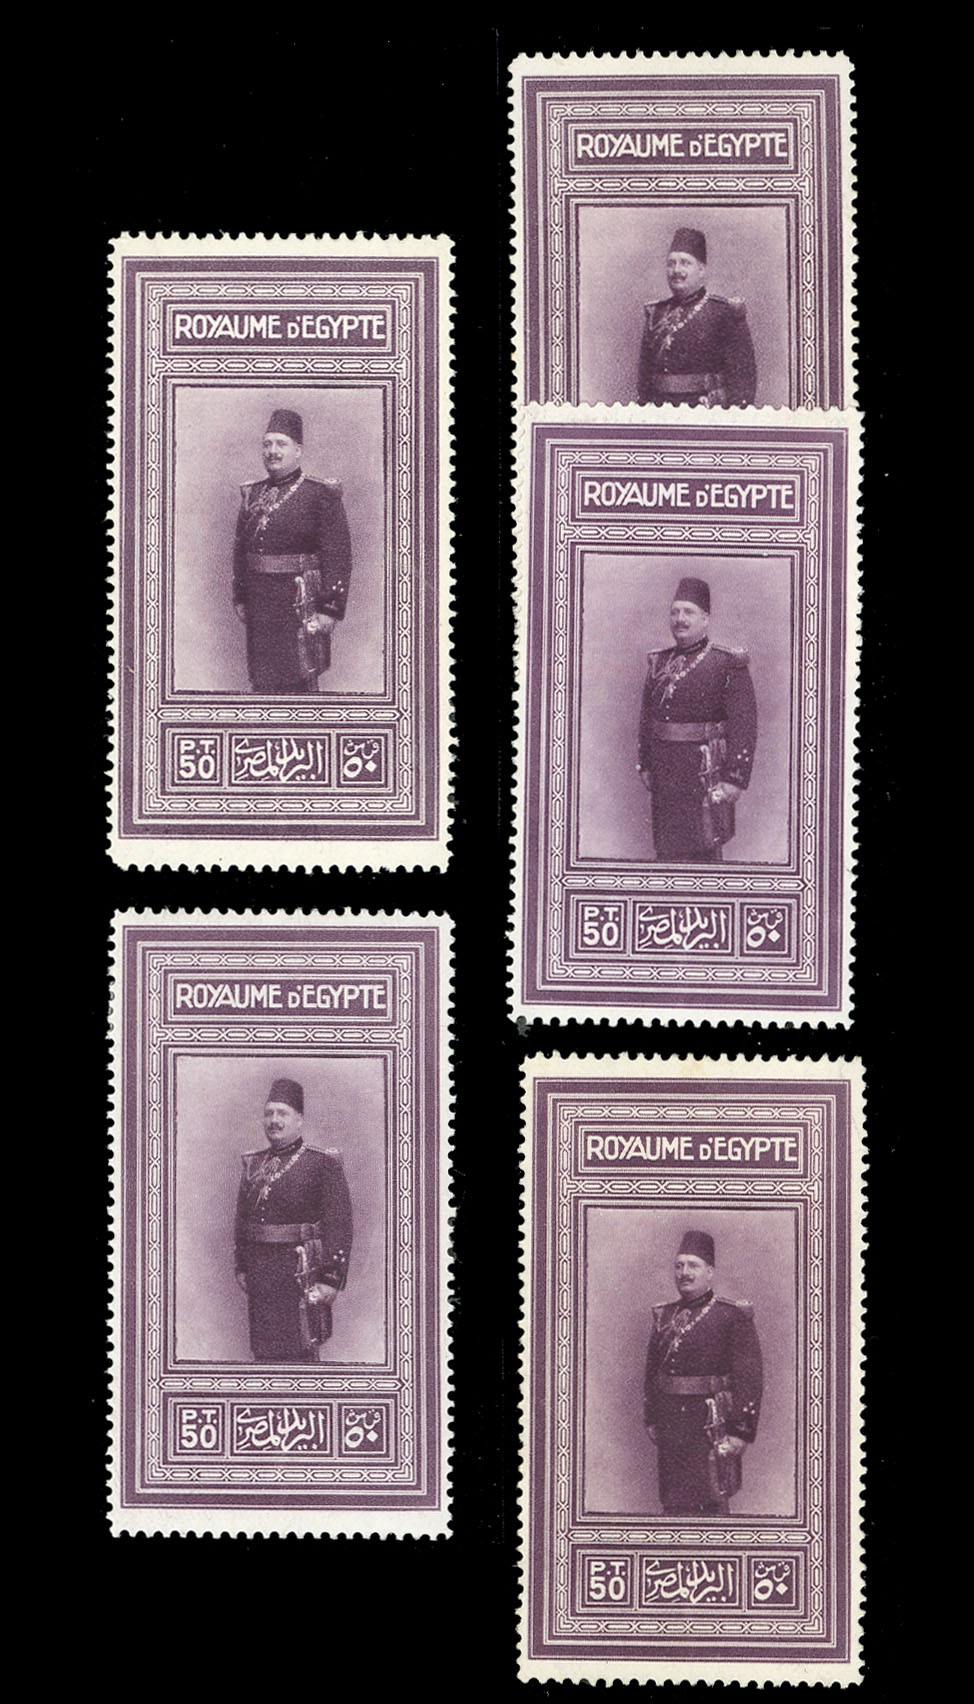 Lot 385 - BRITISH COMMONWEALTH CANADA Special Delivery  -  Cherrystone Auctions U.S. and Worldwide Stamps and Postal History